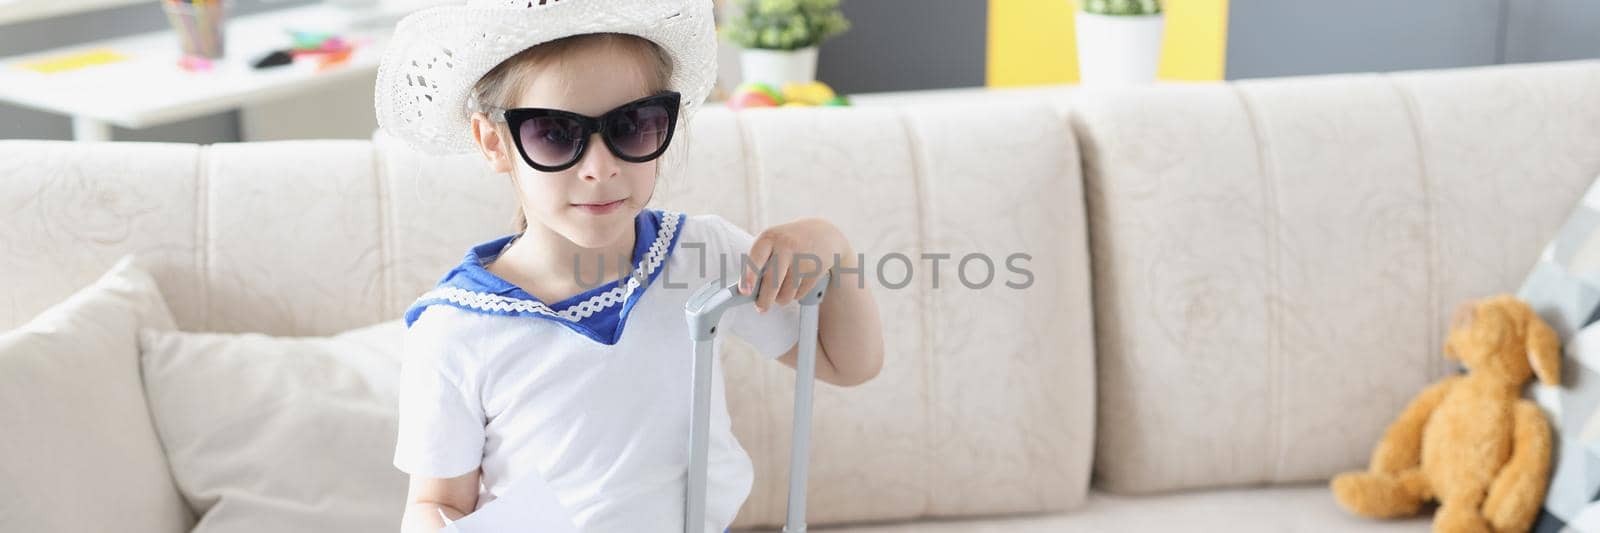 Portrait of little girl fashionista getting ready for summer vacation and perform scene. Child packed suitcase, wear sailor outfit. Summertime, fun concept